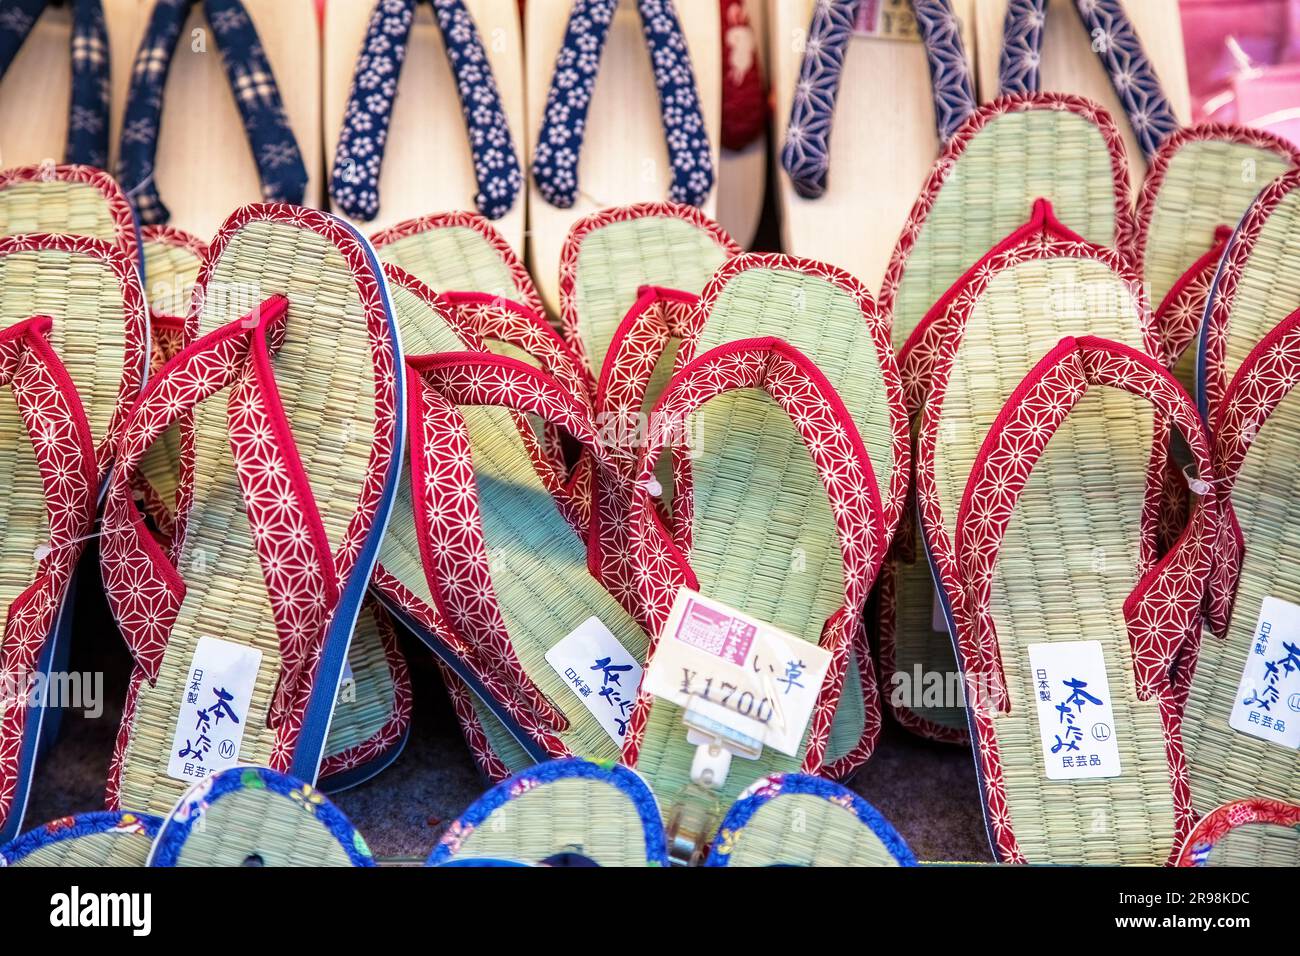 Kyoto, Japan - 15 June 2016. A display of traditional Japanese tatami igusa slippers for sale in a souvenir shop. These are sandals resembling flip-fl Stock Photo